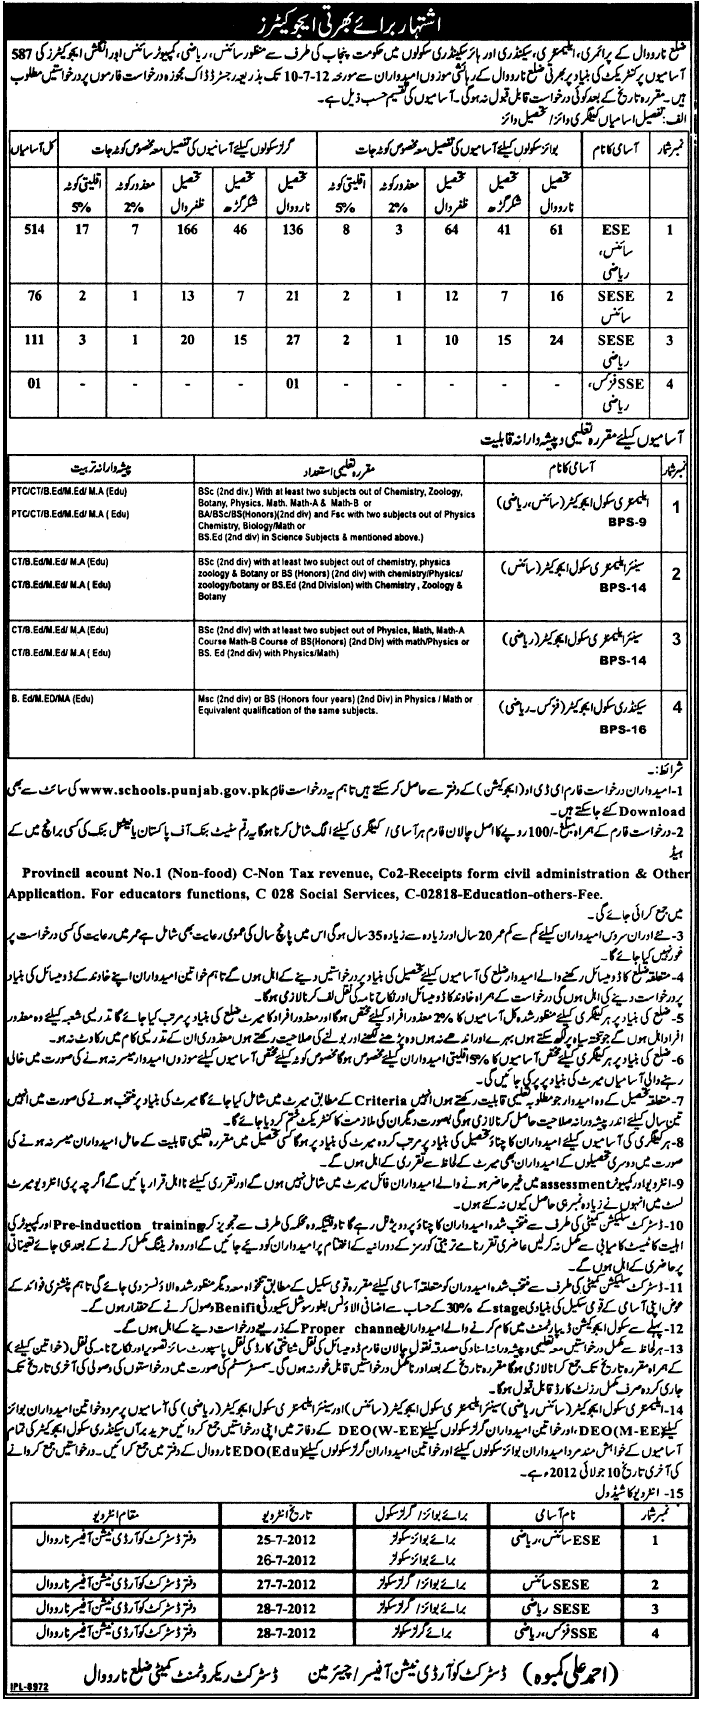 Teachers/Educators Required by Government of Punjab at Primary, Elementary, Secondary and Higher Secondary Schools (Narowal District) (587 Vacancies) (Govt. Job)